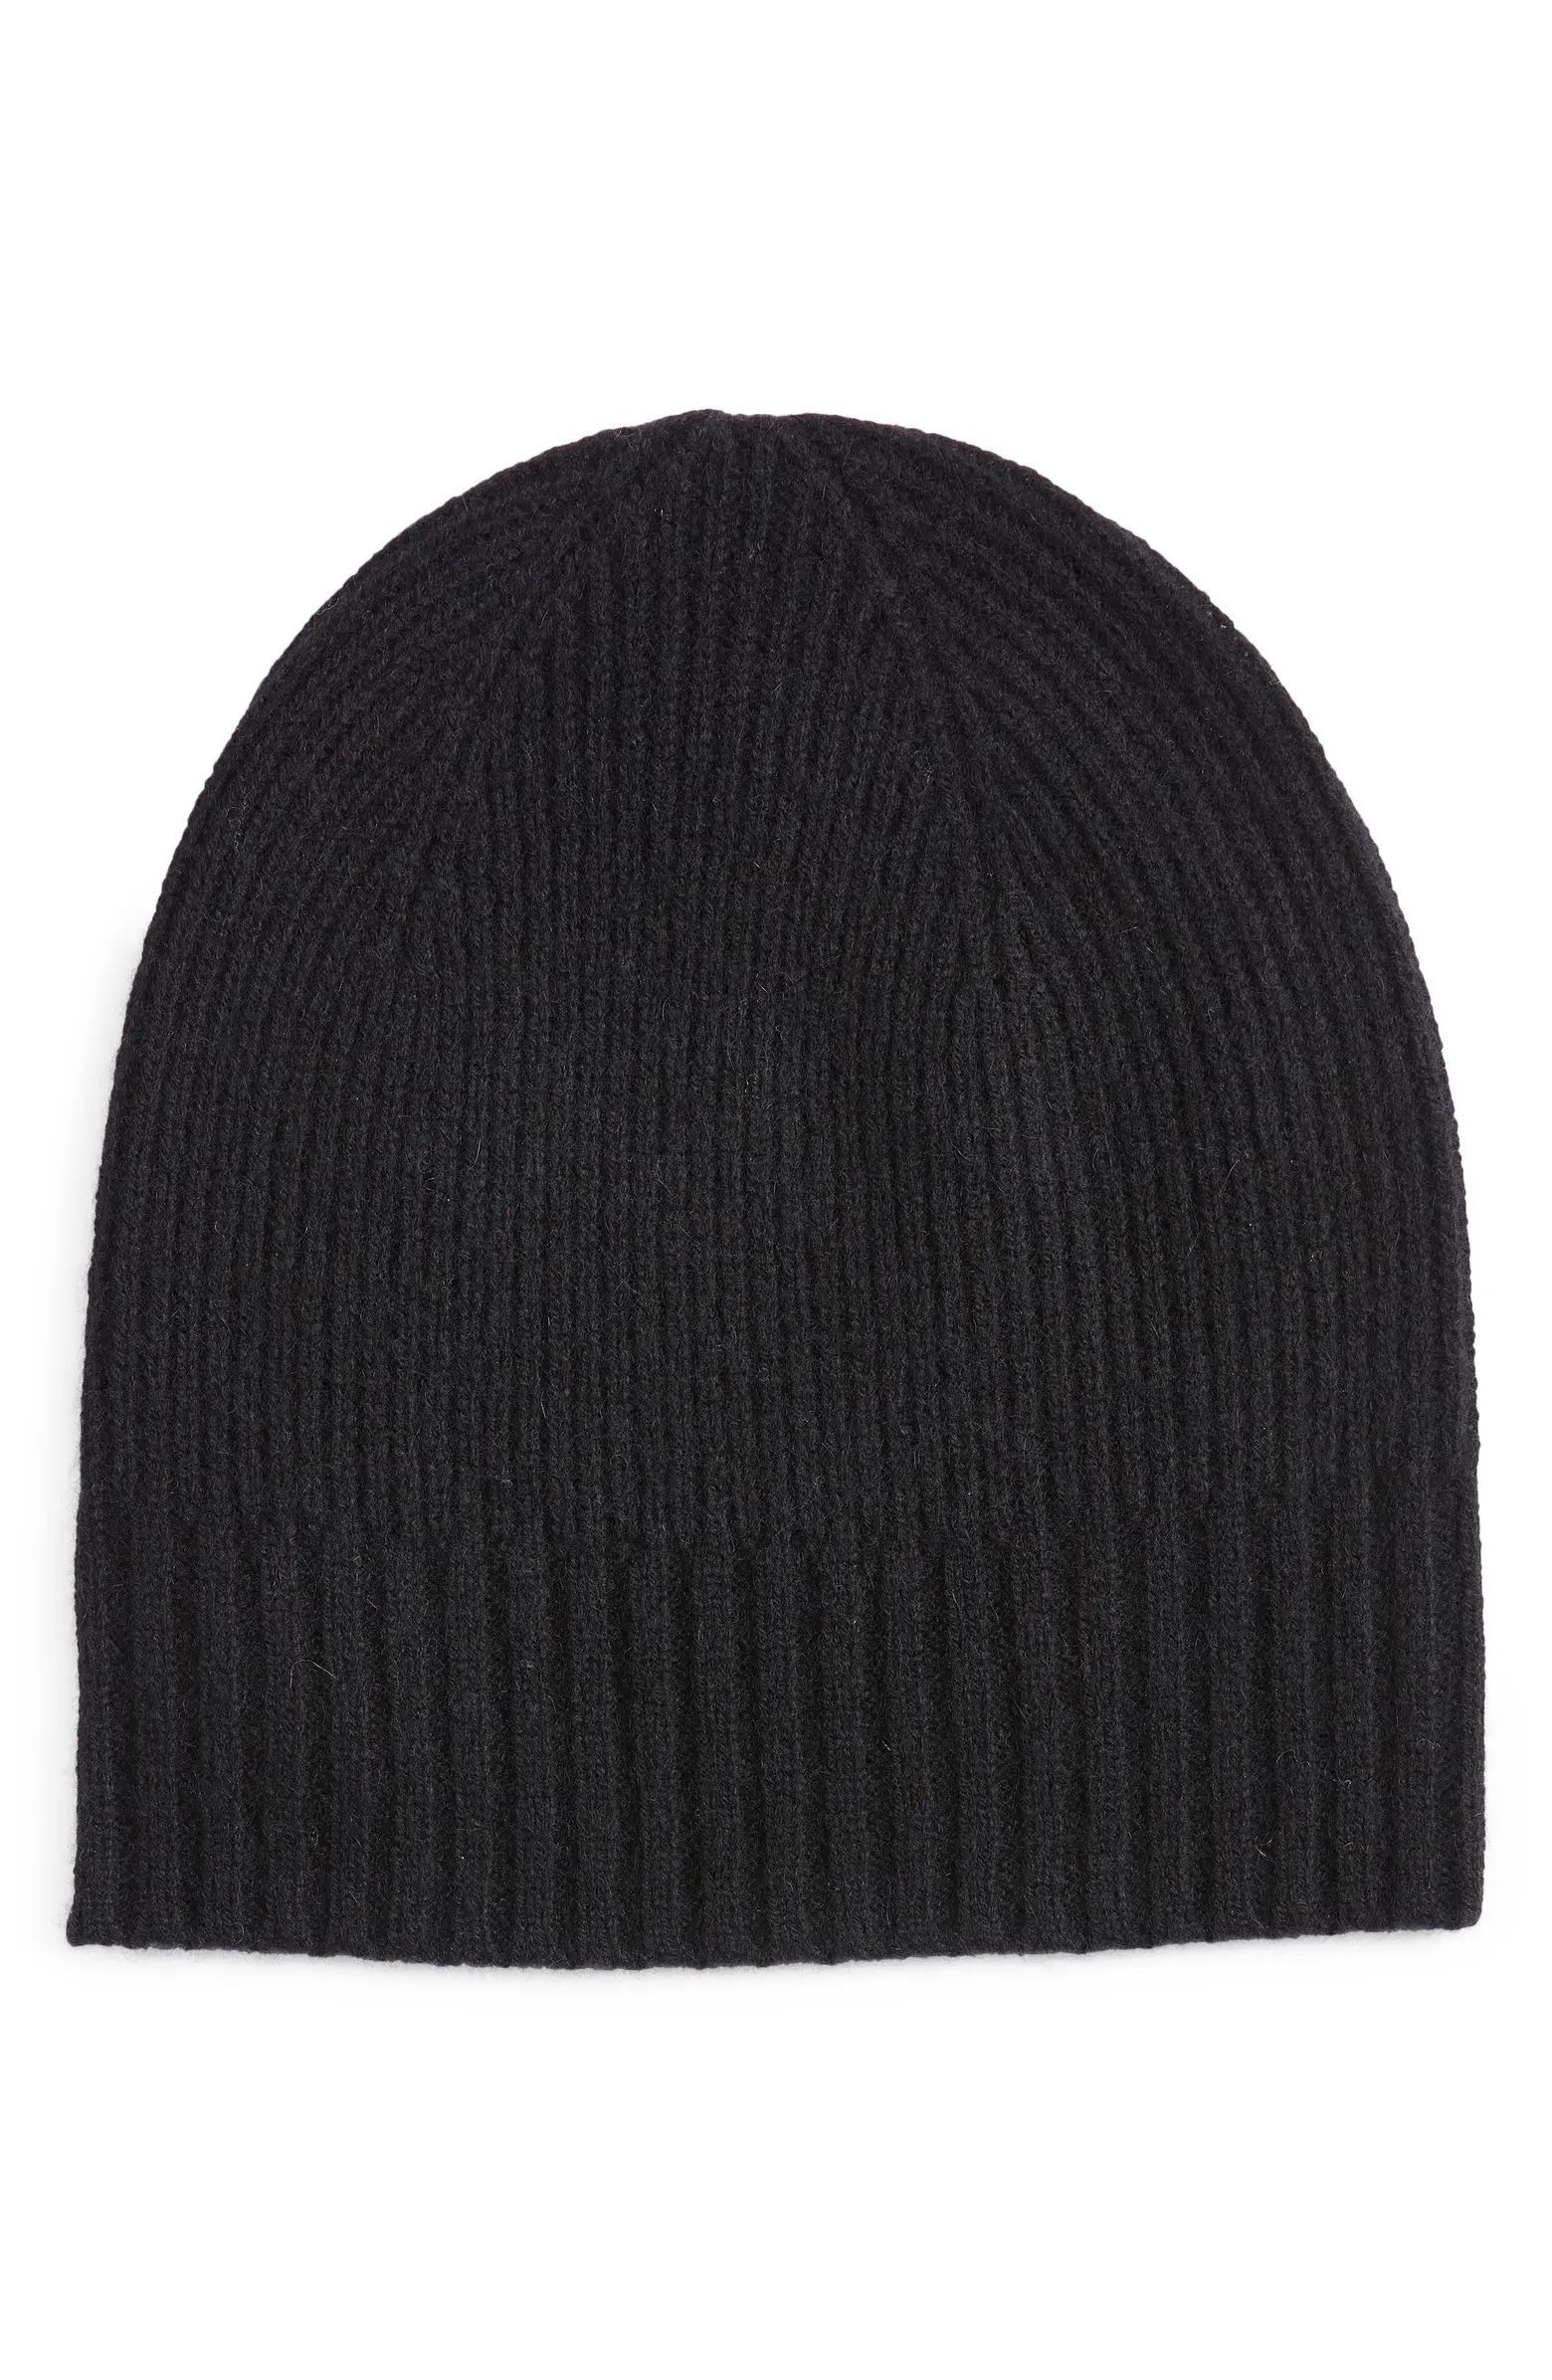 Nordstrom Recycled Cashmere Blend Beanie | Nordstrom | Nordstrom